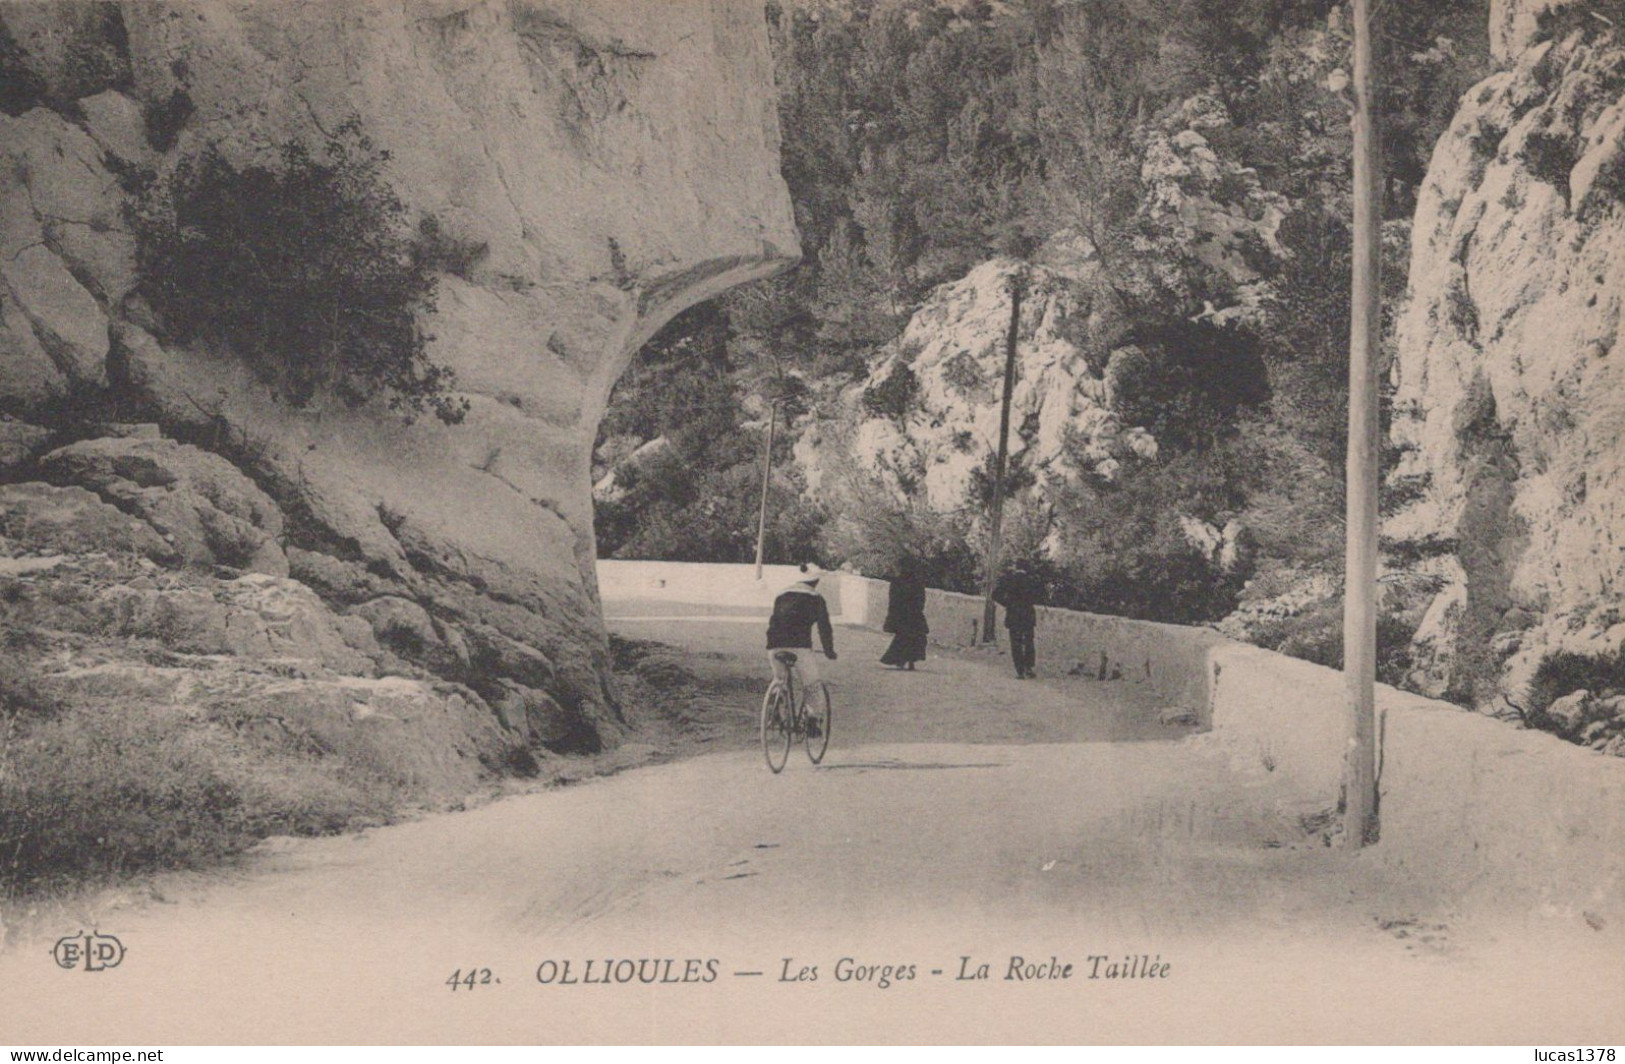 83 / OLLIOULES / LES GORGES / LA ROCHE TAILLEE / ELD 442 - Ollioules